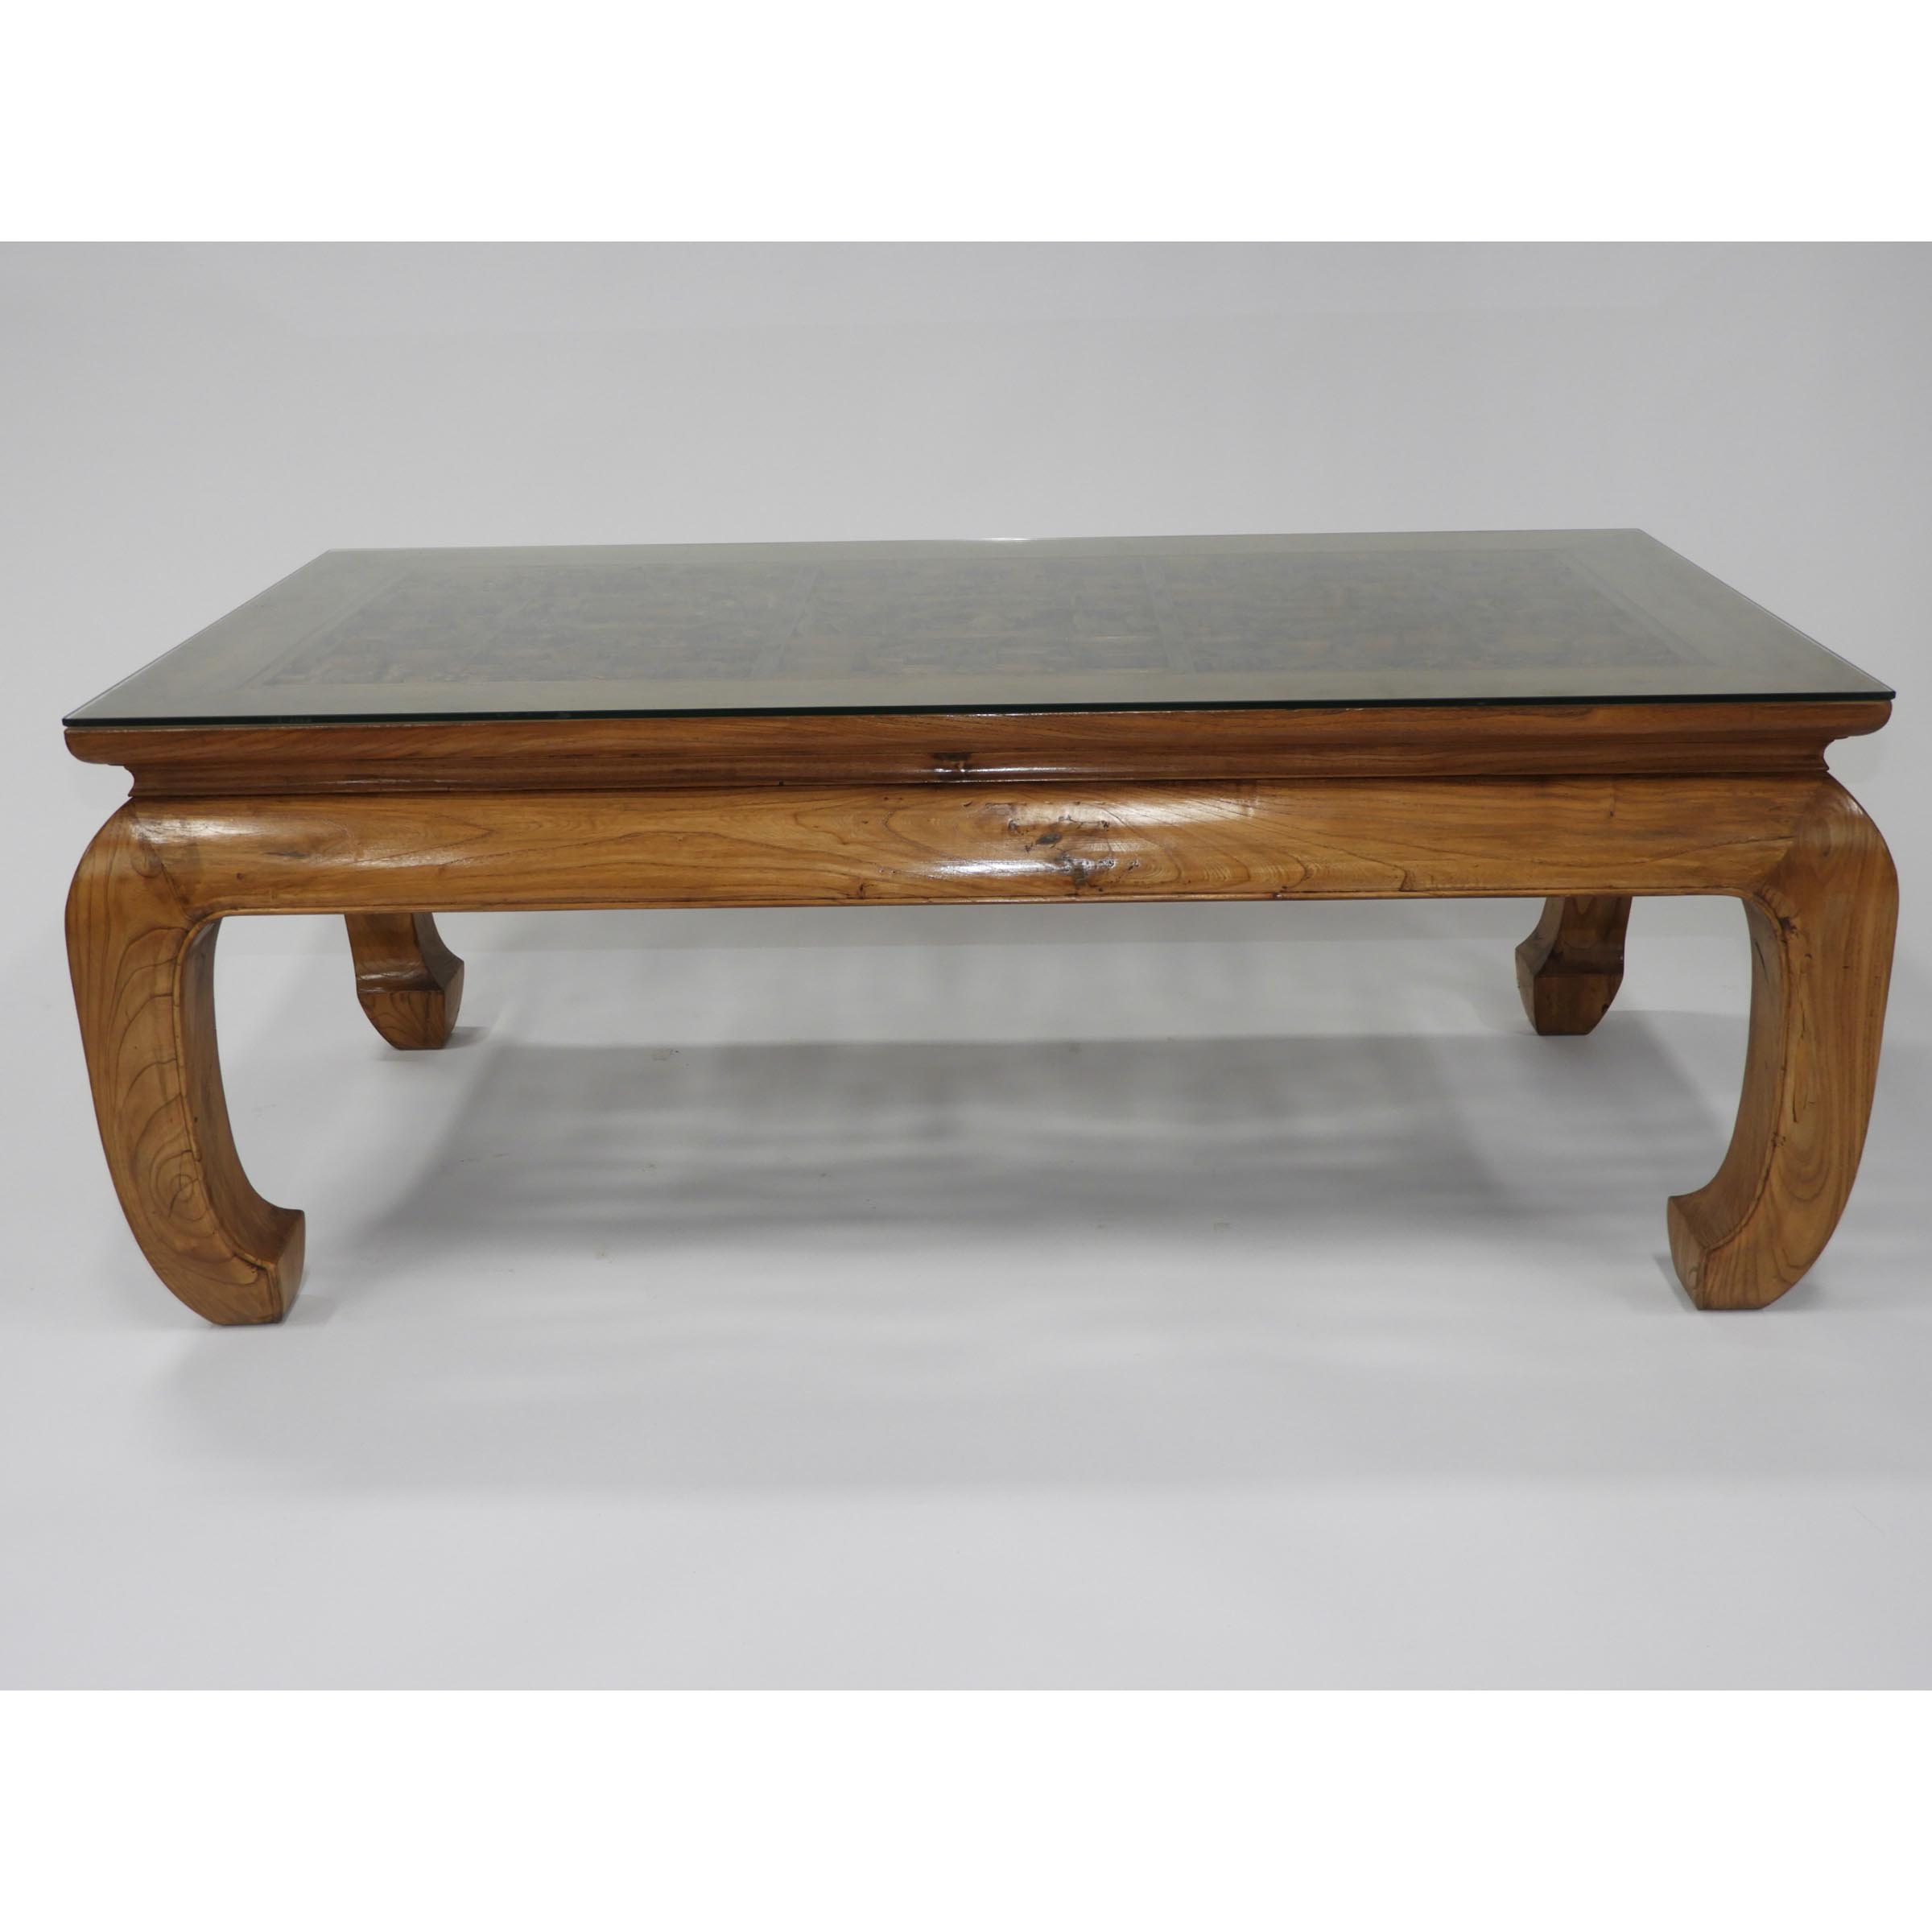 A Chinese Elmwood Table with Carved Top